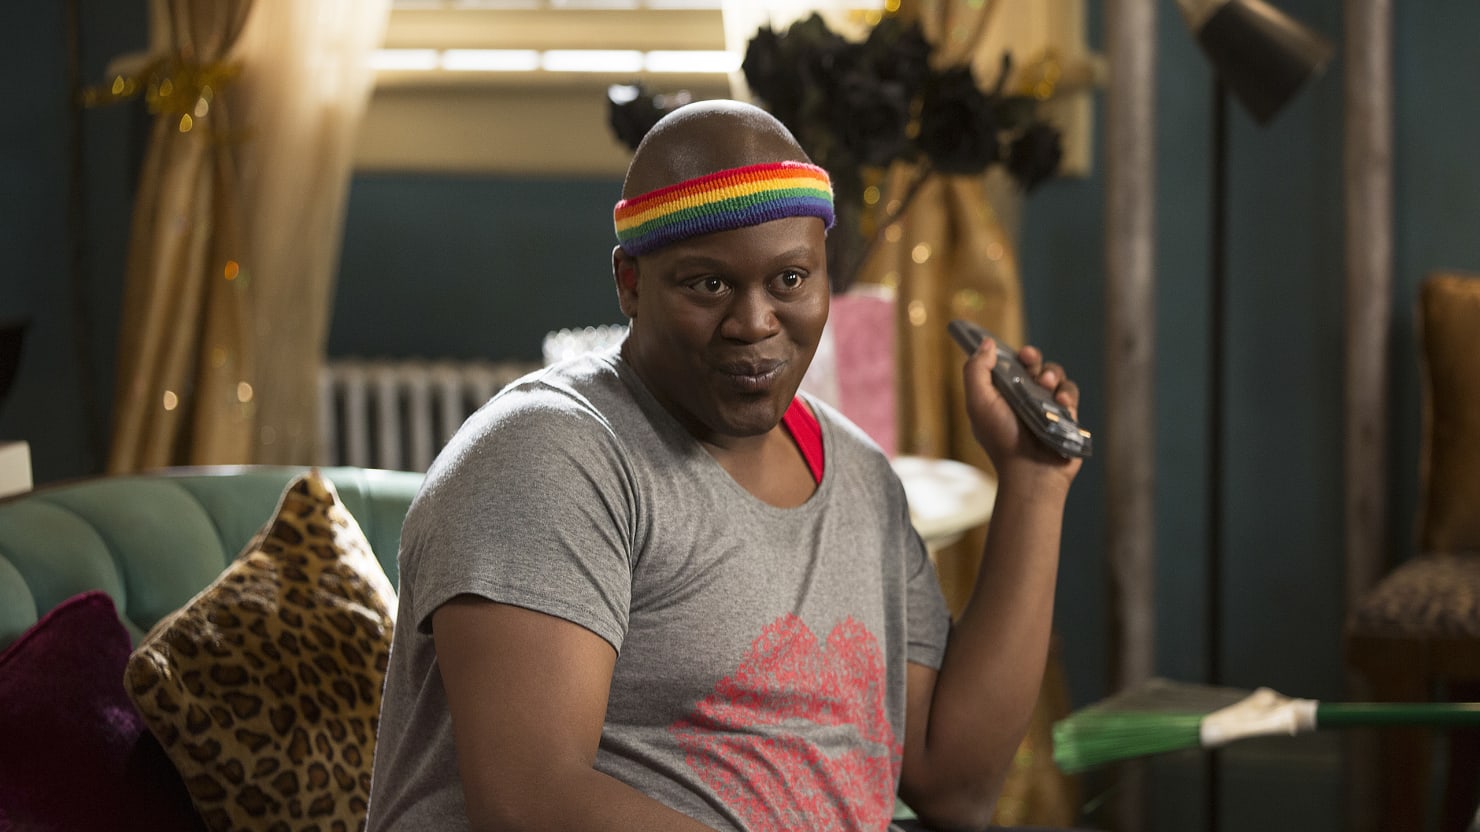 Tituss Burgess shares his must-have sneakers, skincare and more